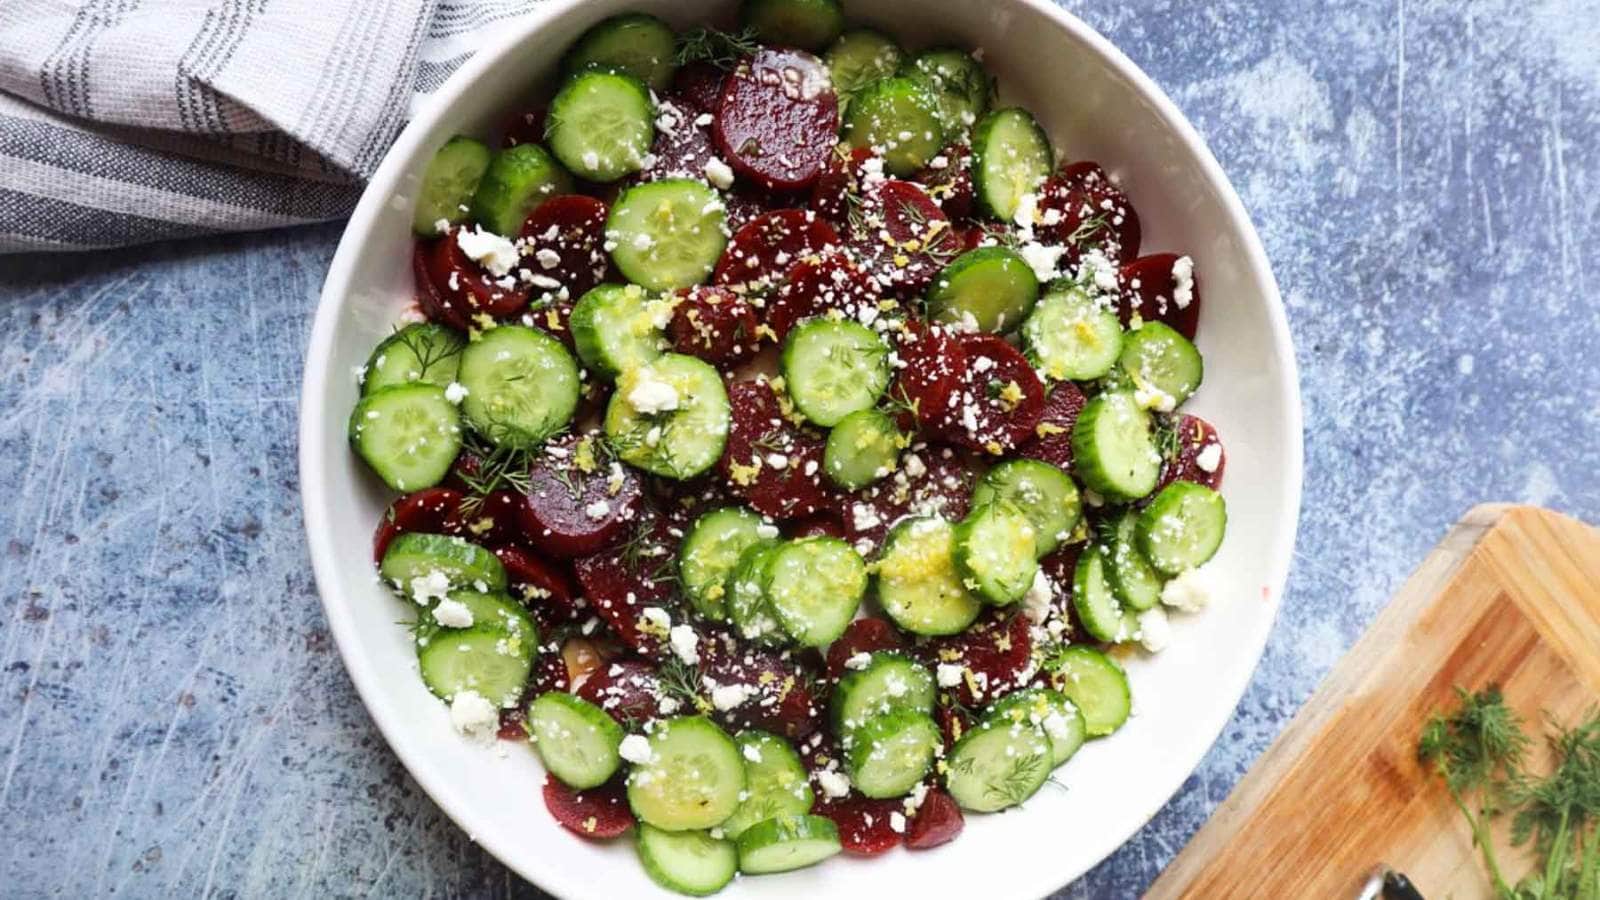 Beet And Cucumber Salad recipe by Bless This Meal.